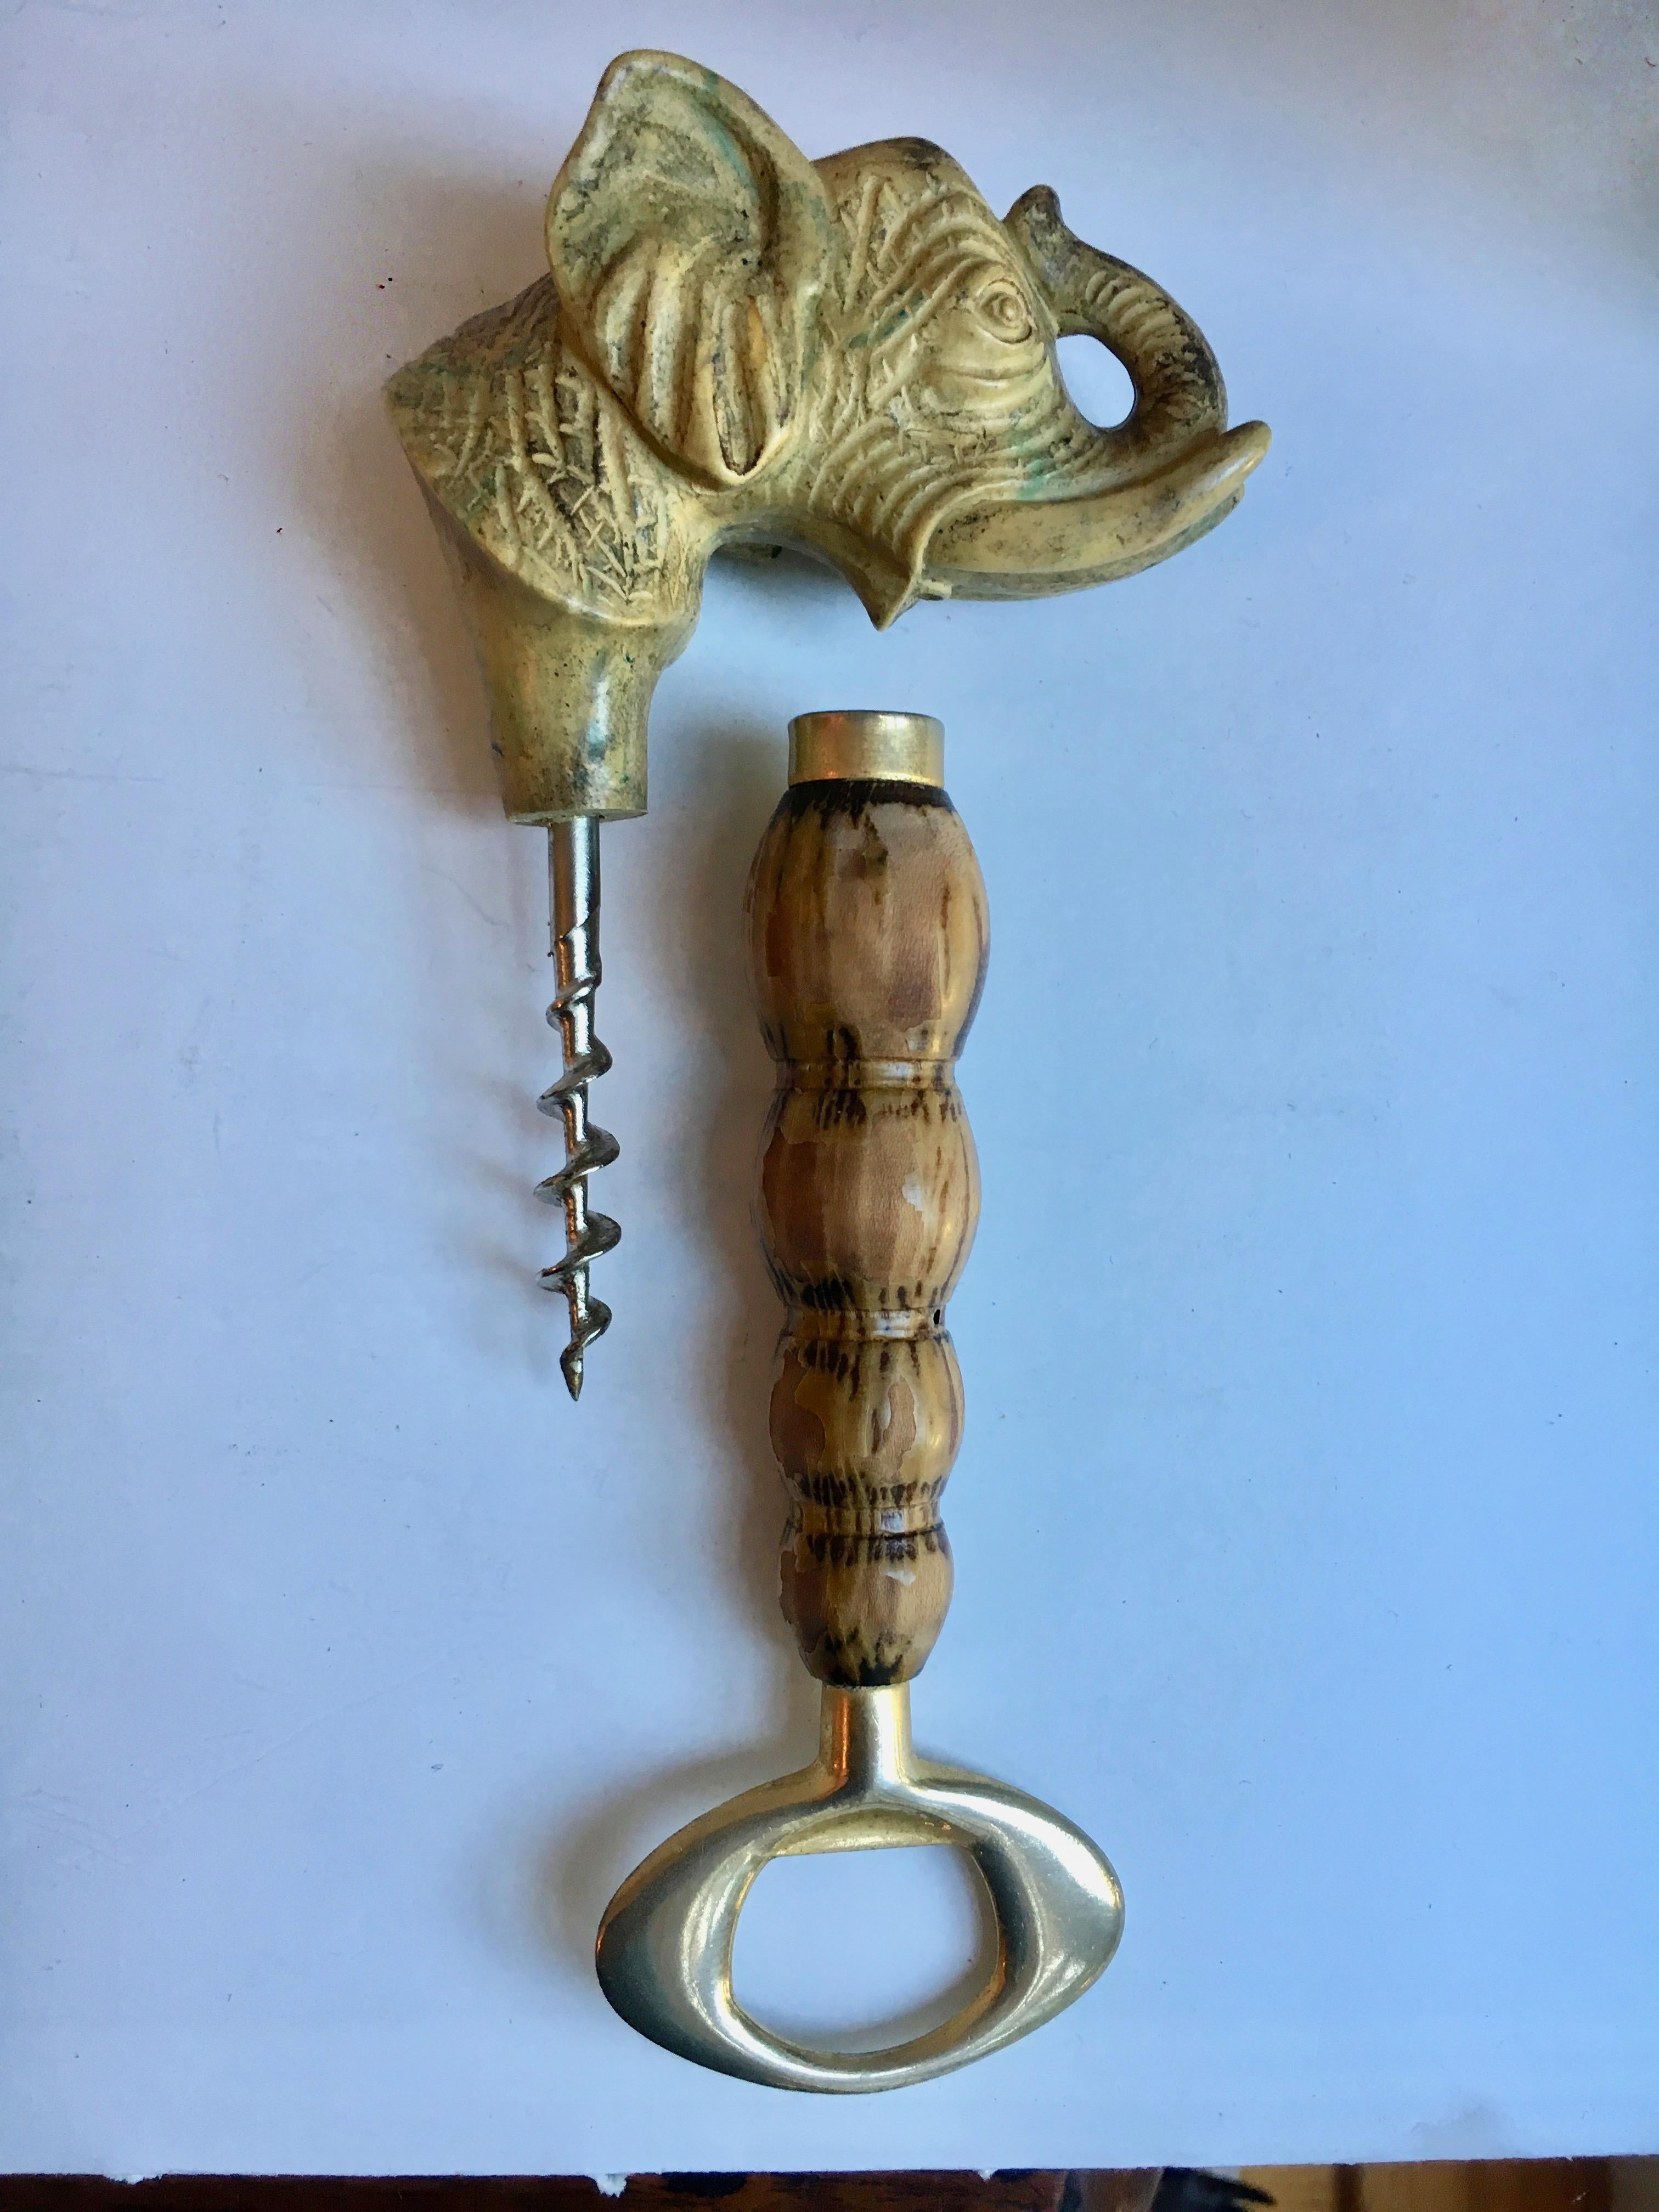 Elephant brass bottle wine opener, a resin elephant with brass and wood details.
The head unscrews to become a wine corkscrew opener.